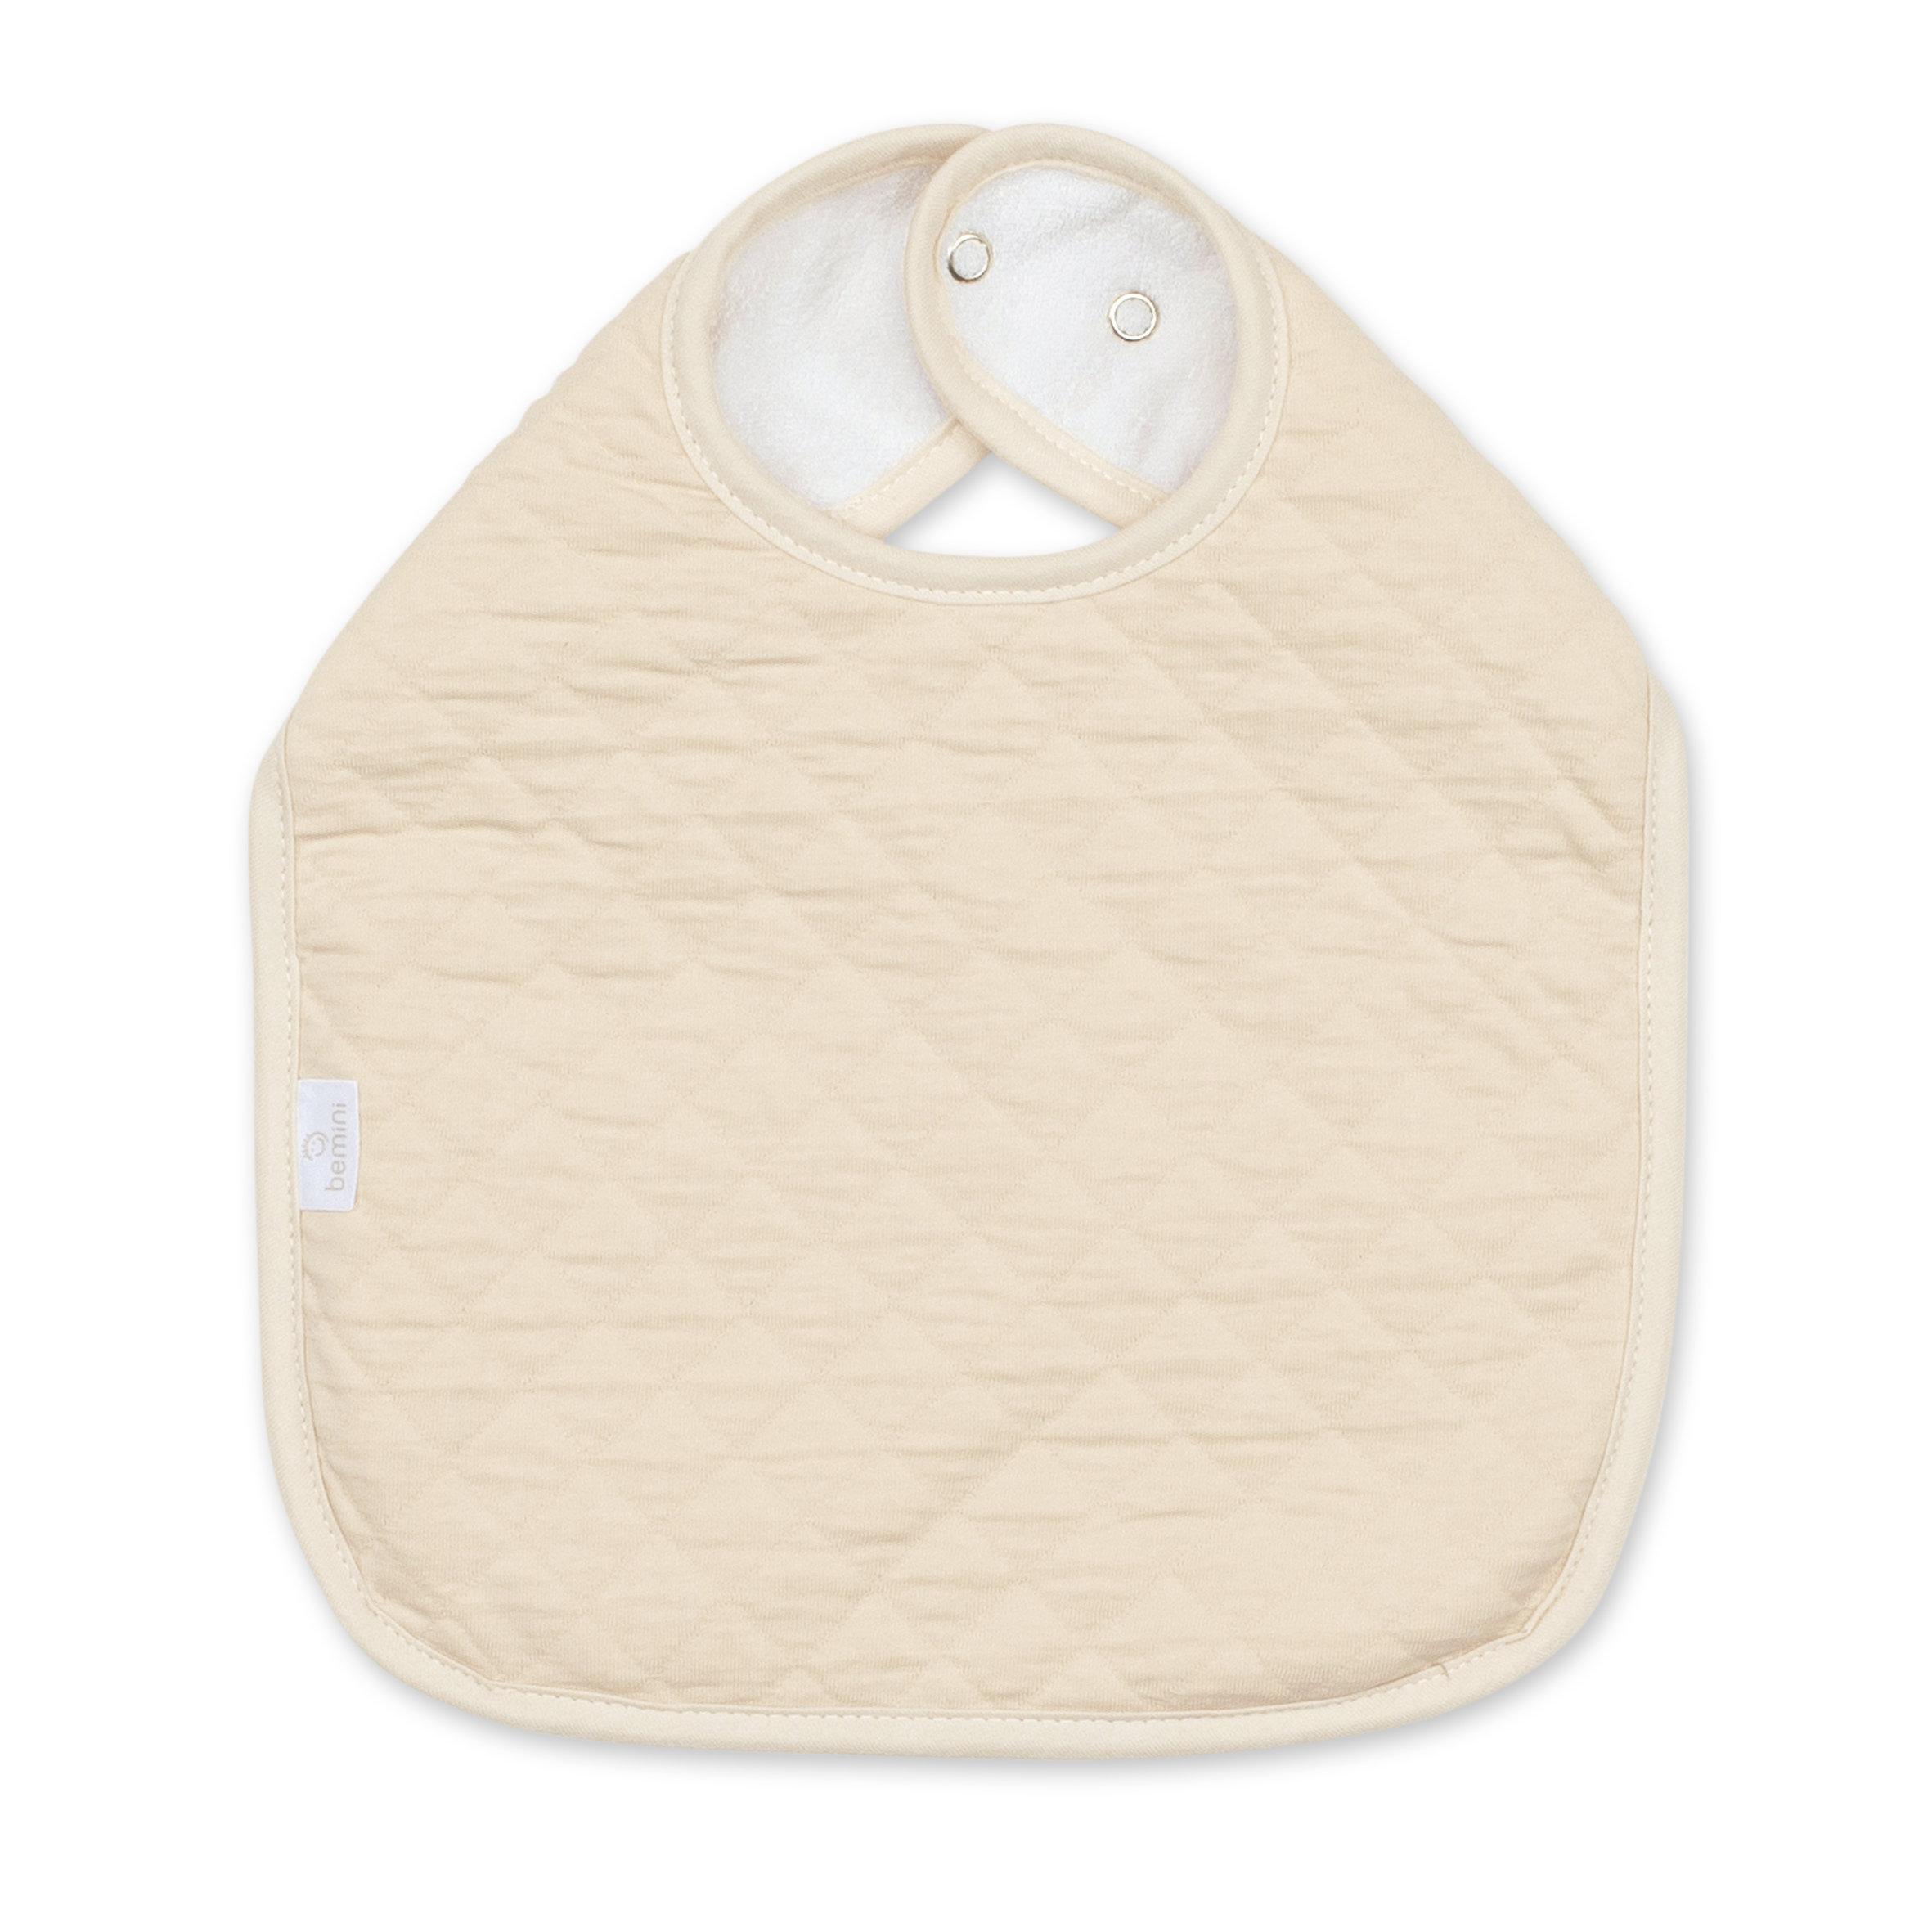 Babero waterproof Pady quilted jersey 37cm QUILT Cream